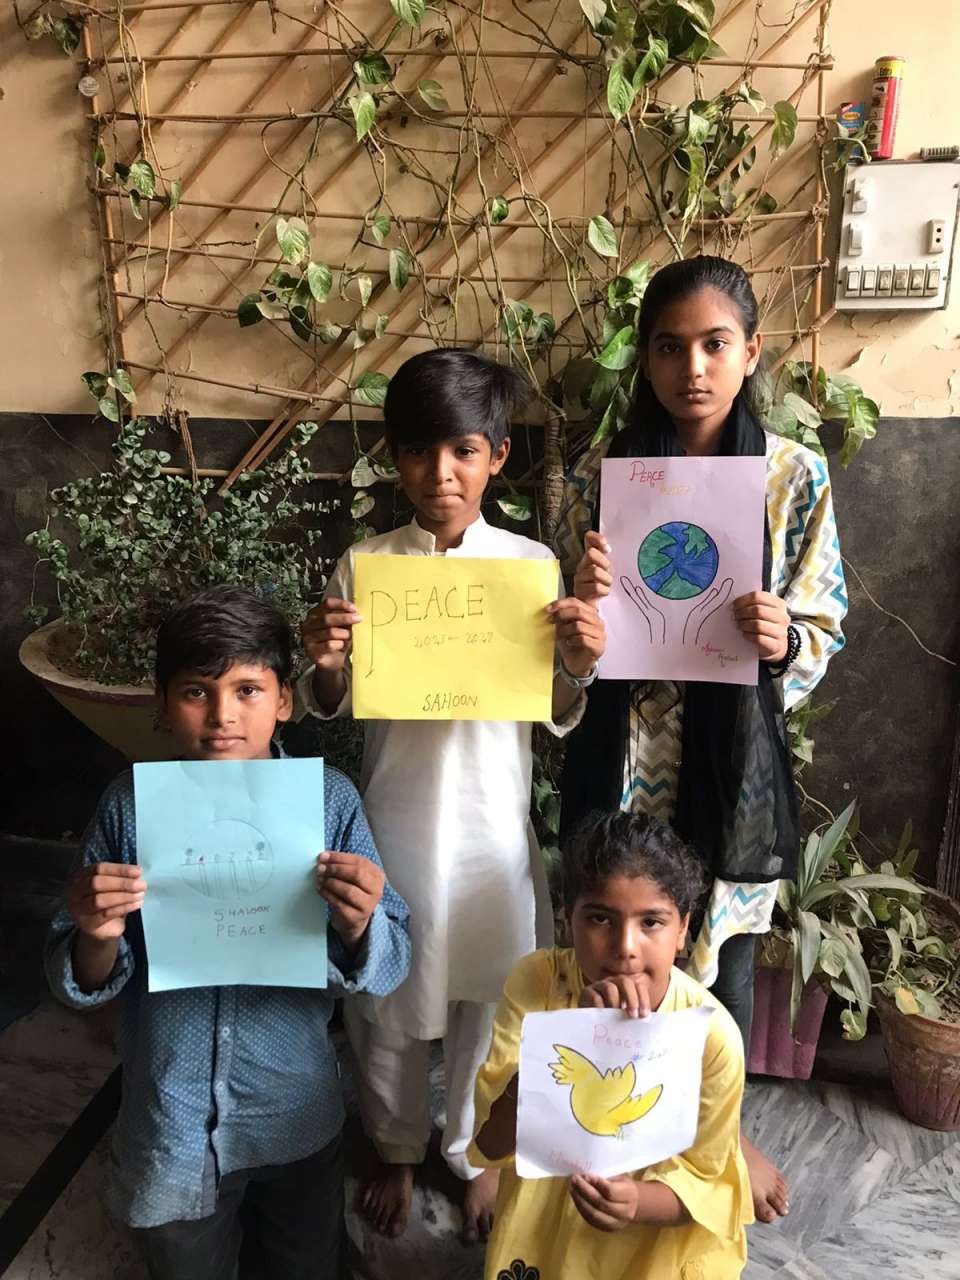 Vote Comment Like Share & sent your pictures for Global #PeacePicture Contest, topic: “ World Children United for #Peace2027” for the Day Against Child Labour 2023 #DaniilFoundation<br />participant from Sargodha in  Pakistan, Miss.Angel Kashif, Phone +92 308 1391498  WhatsApp contact her for Cooperation, To Donate, To Volunteer For Interview <br /><br />& in the memory of Daniil, every year a drawing Contest for #Peace2027 is held, and as Daniil has been drawing #PeacePictures in last days, we invite you to donate to the Daniil Foundation to support him ivacademy.net/en/donate<br />Important Please SHARE this information wide to enable all 8B+ people to participate and Complete Ultimate Global Peace Building by 2027